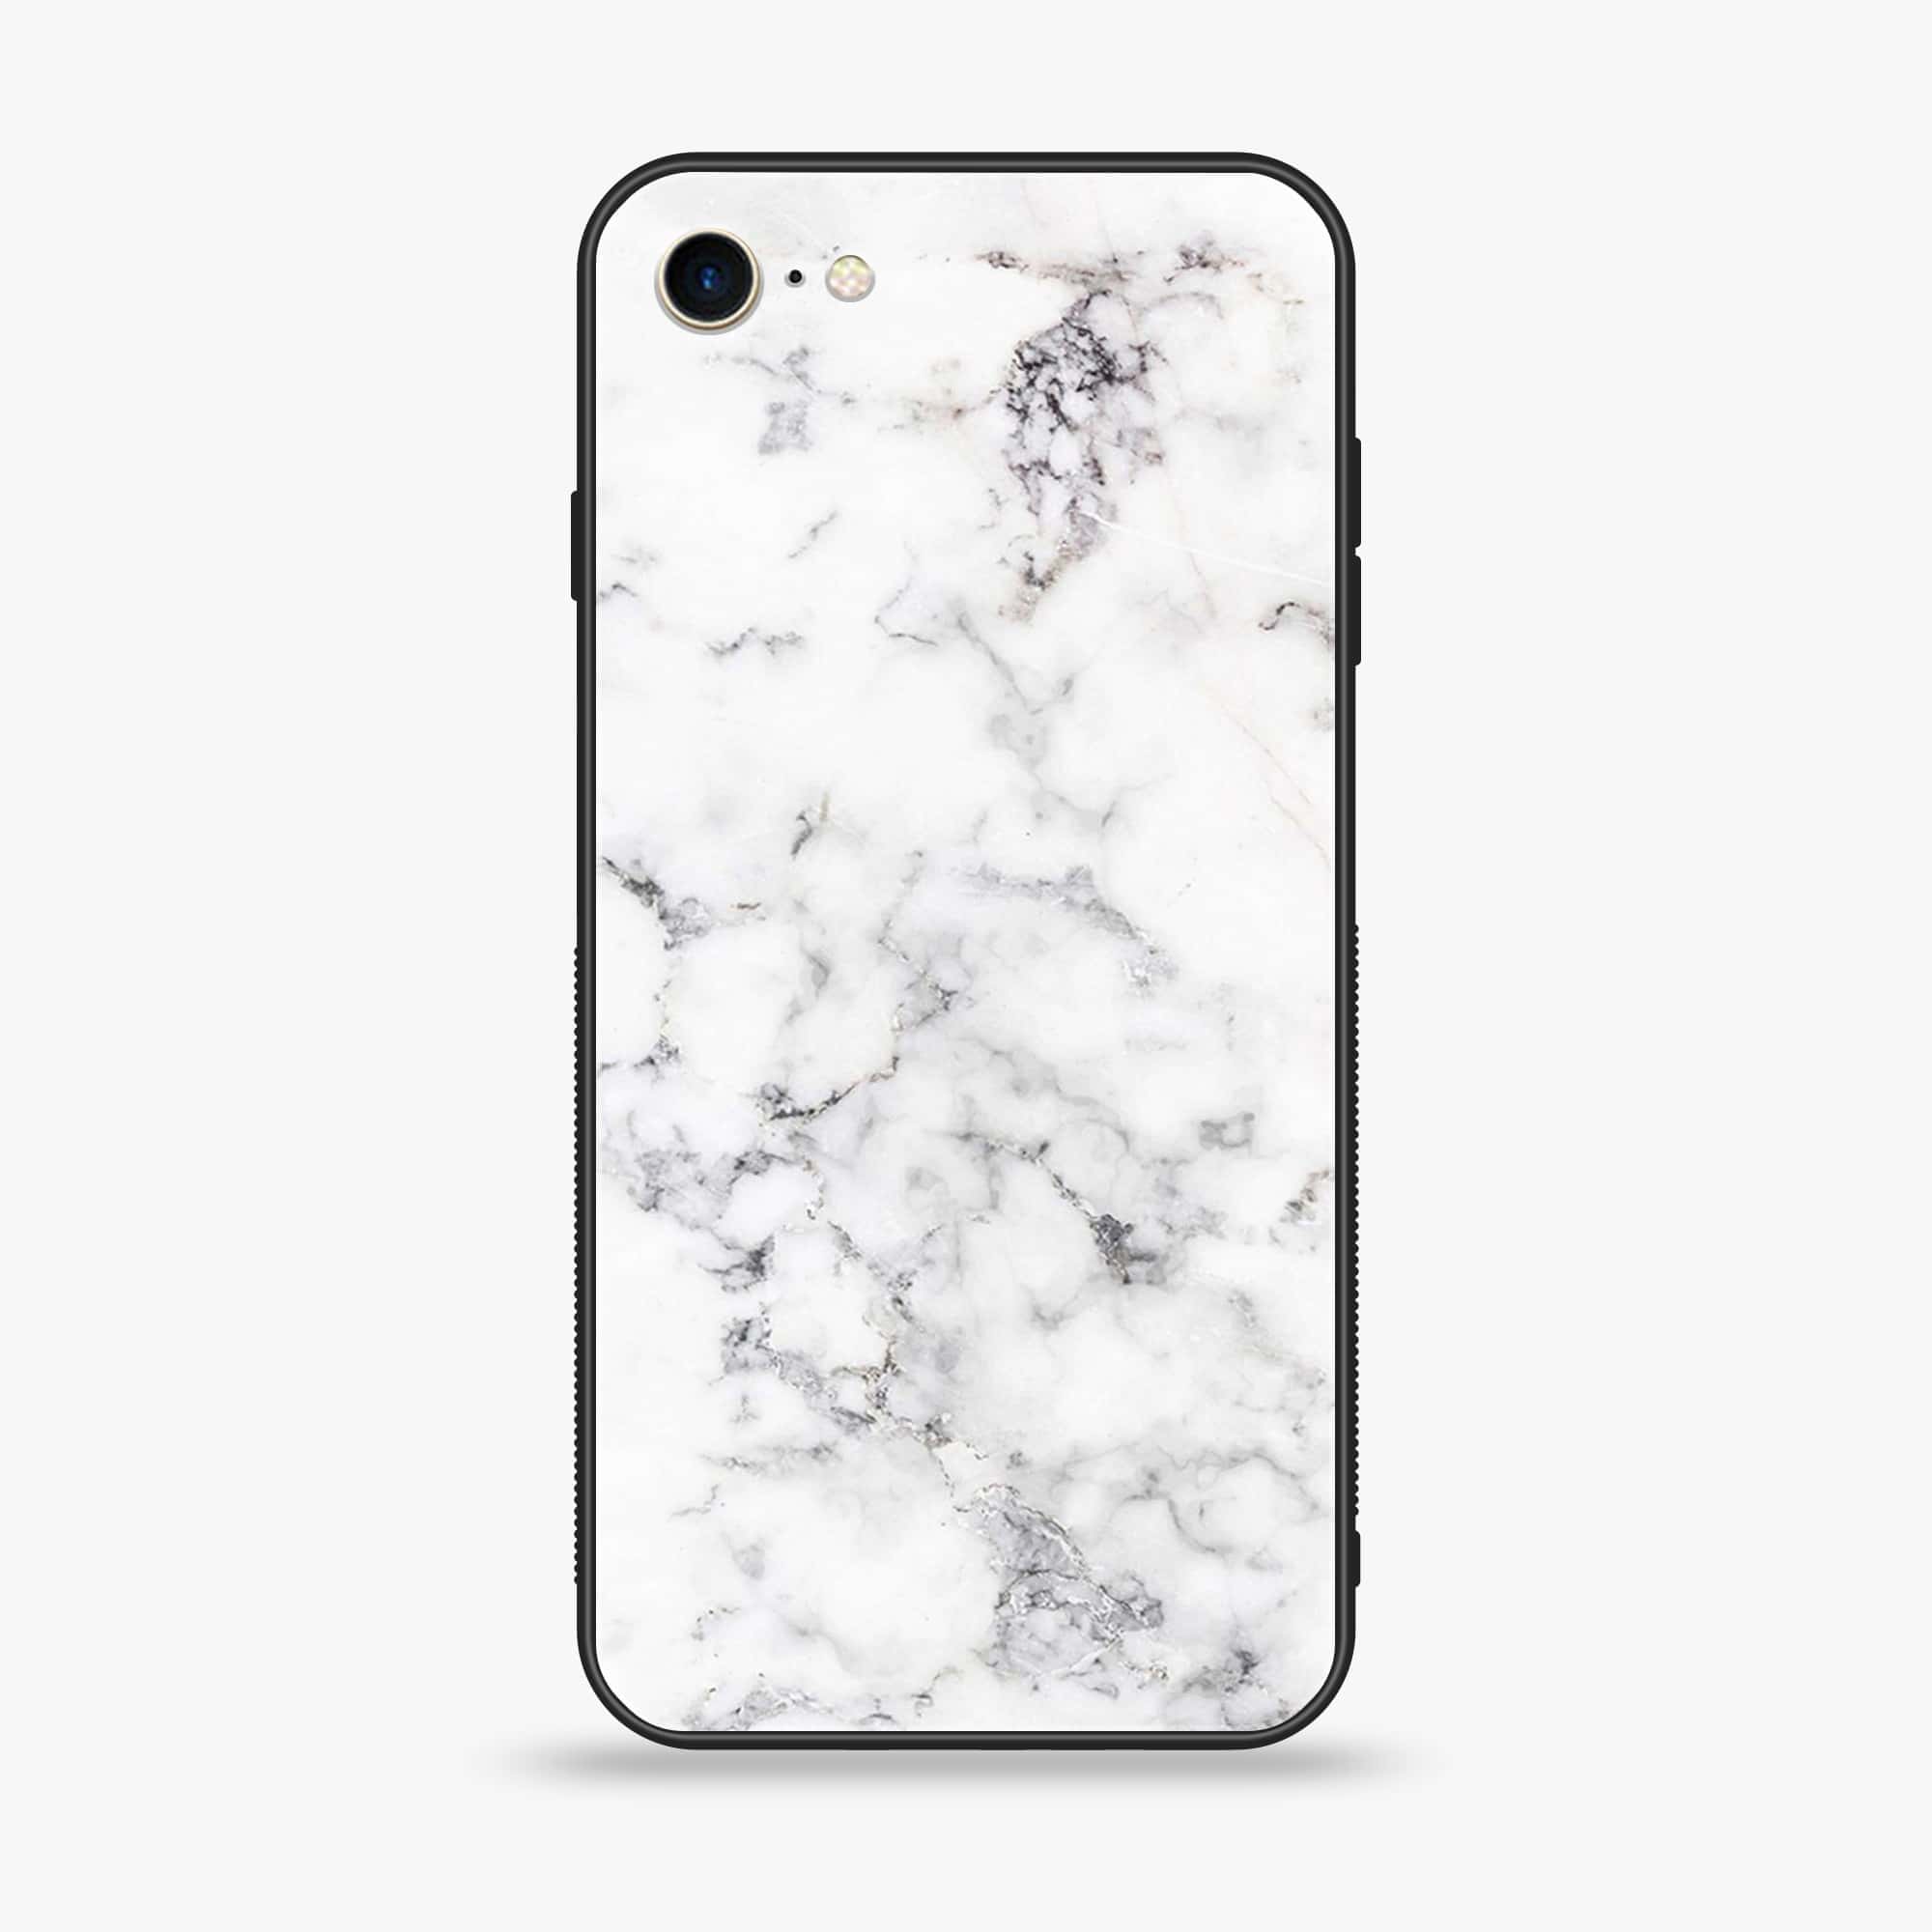 iPhone 6 - White Marble Series - Premium Printed Glass soft Bumper shock Proof Case